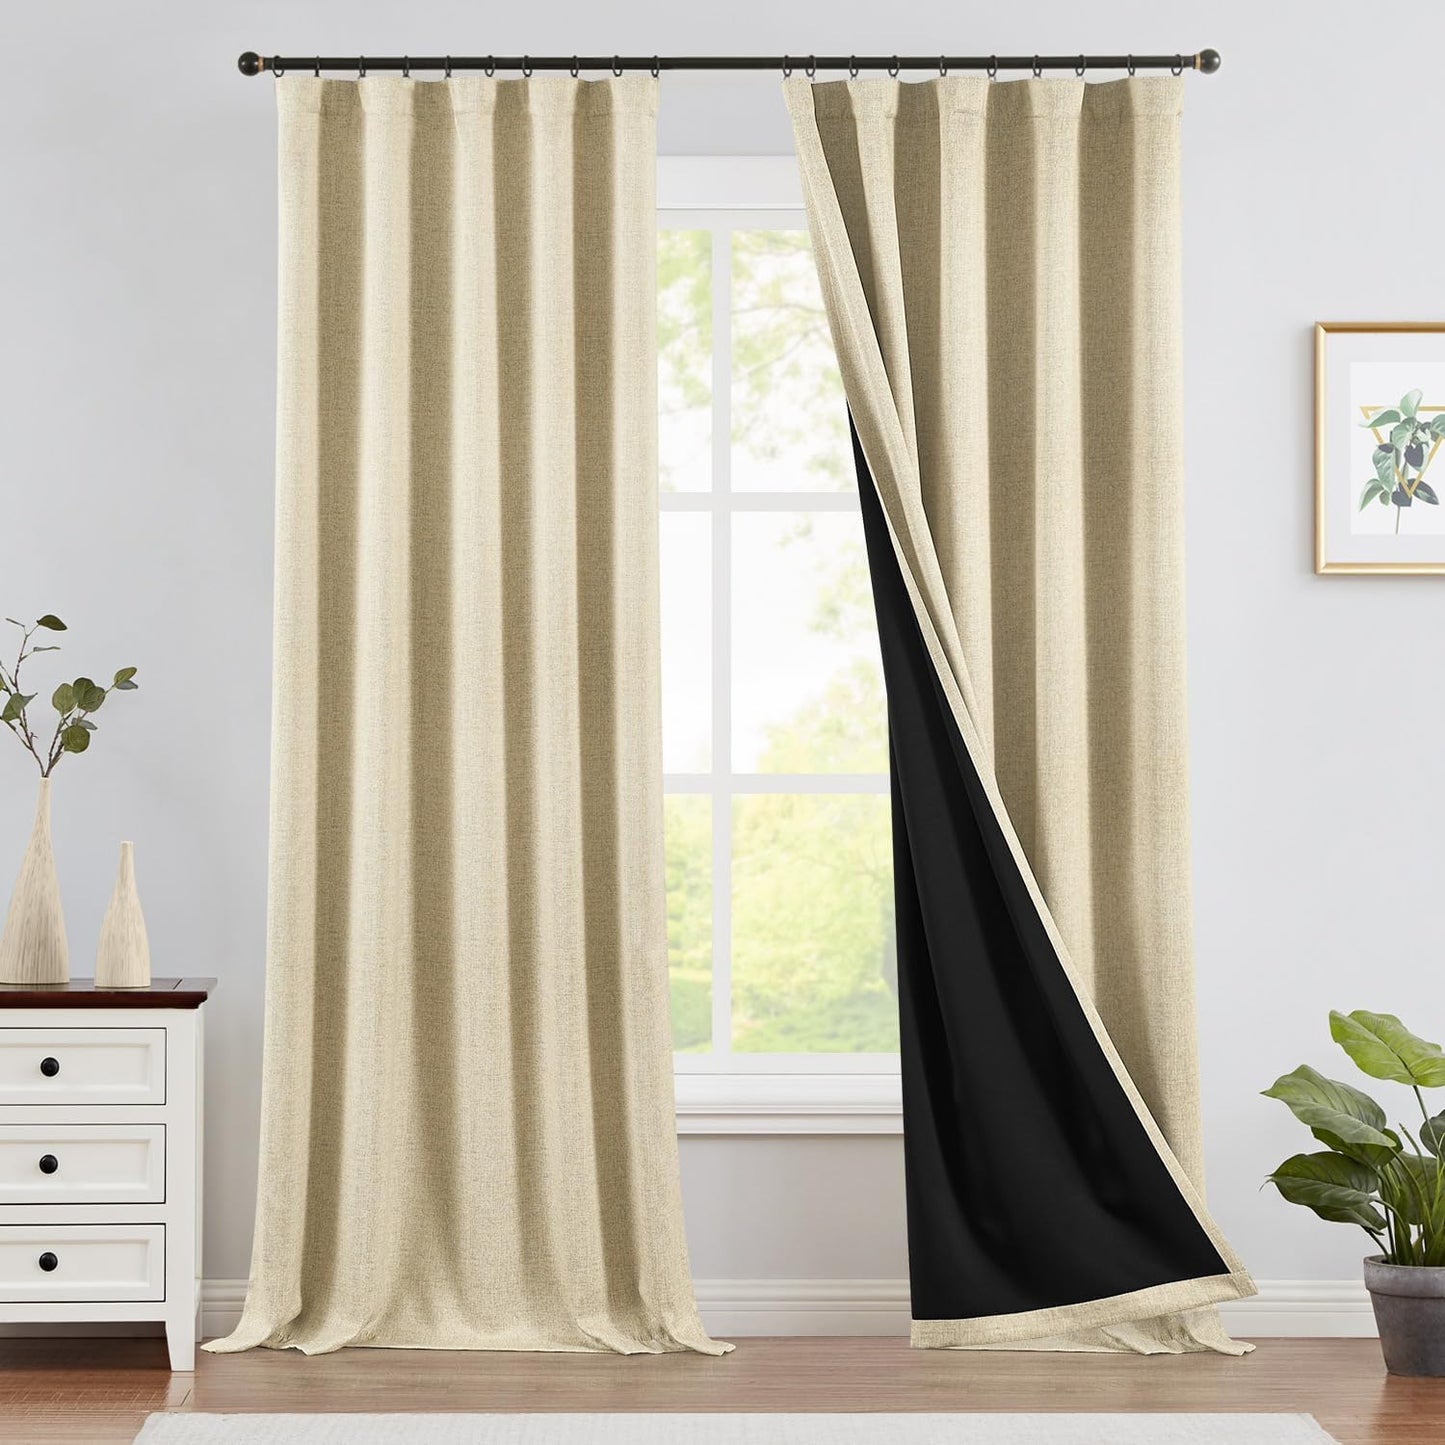 JINCHAN 100% Blackout Curtains for Bedroom, 90 Inch Length Linen Textured Drapes for Living Room, Thermal Insulated Full Light Blocking Curtains, Grommet Top Window Treatments 2 Panels Heathered White  CKNY HOME FASHION Smooth | Beige 96"L 